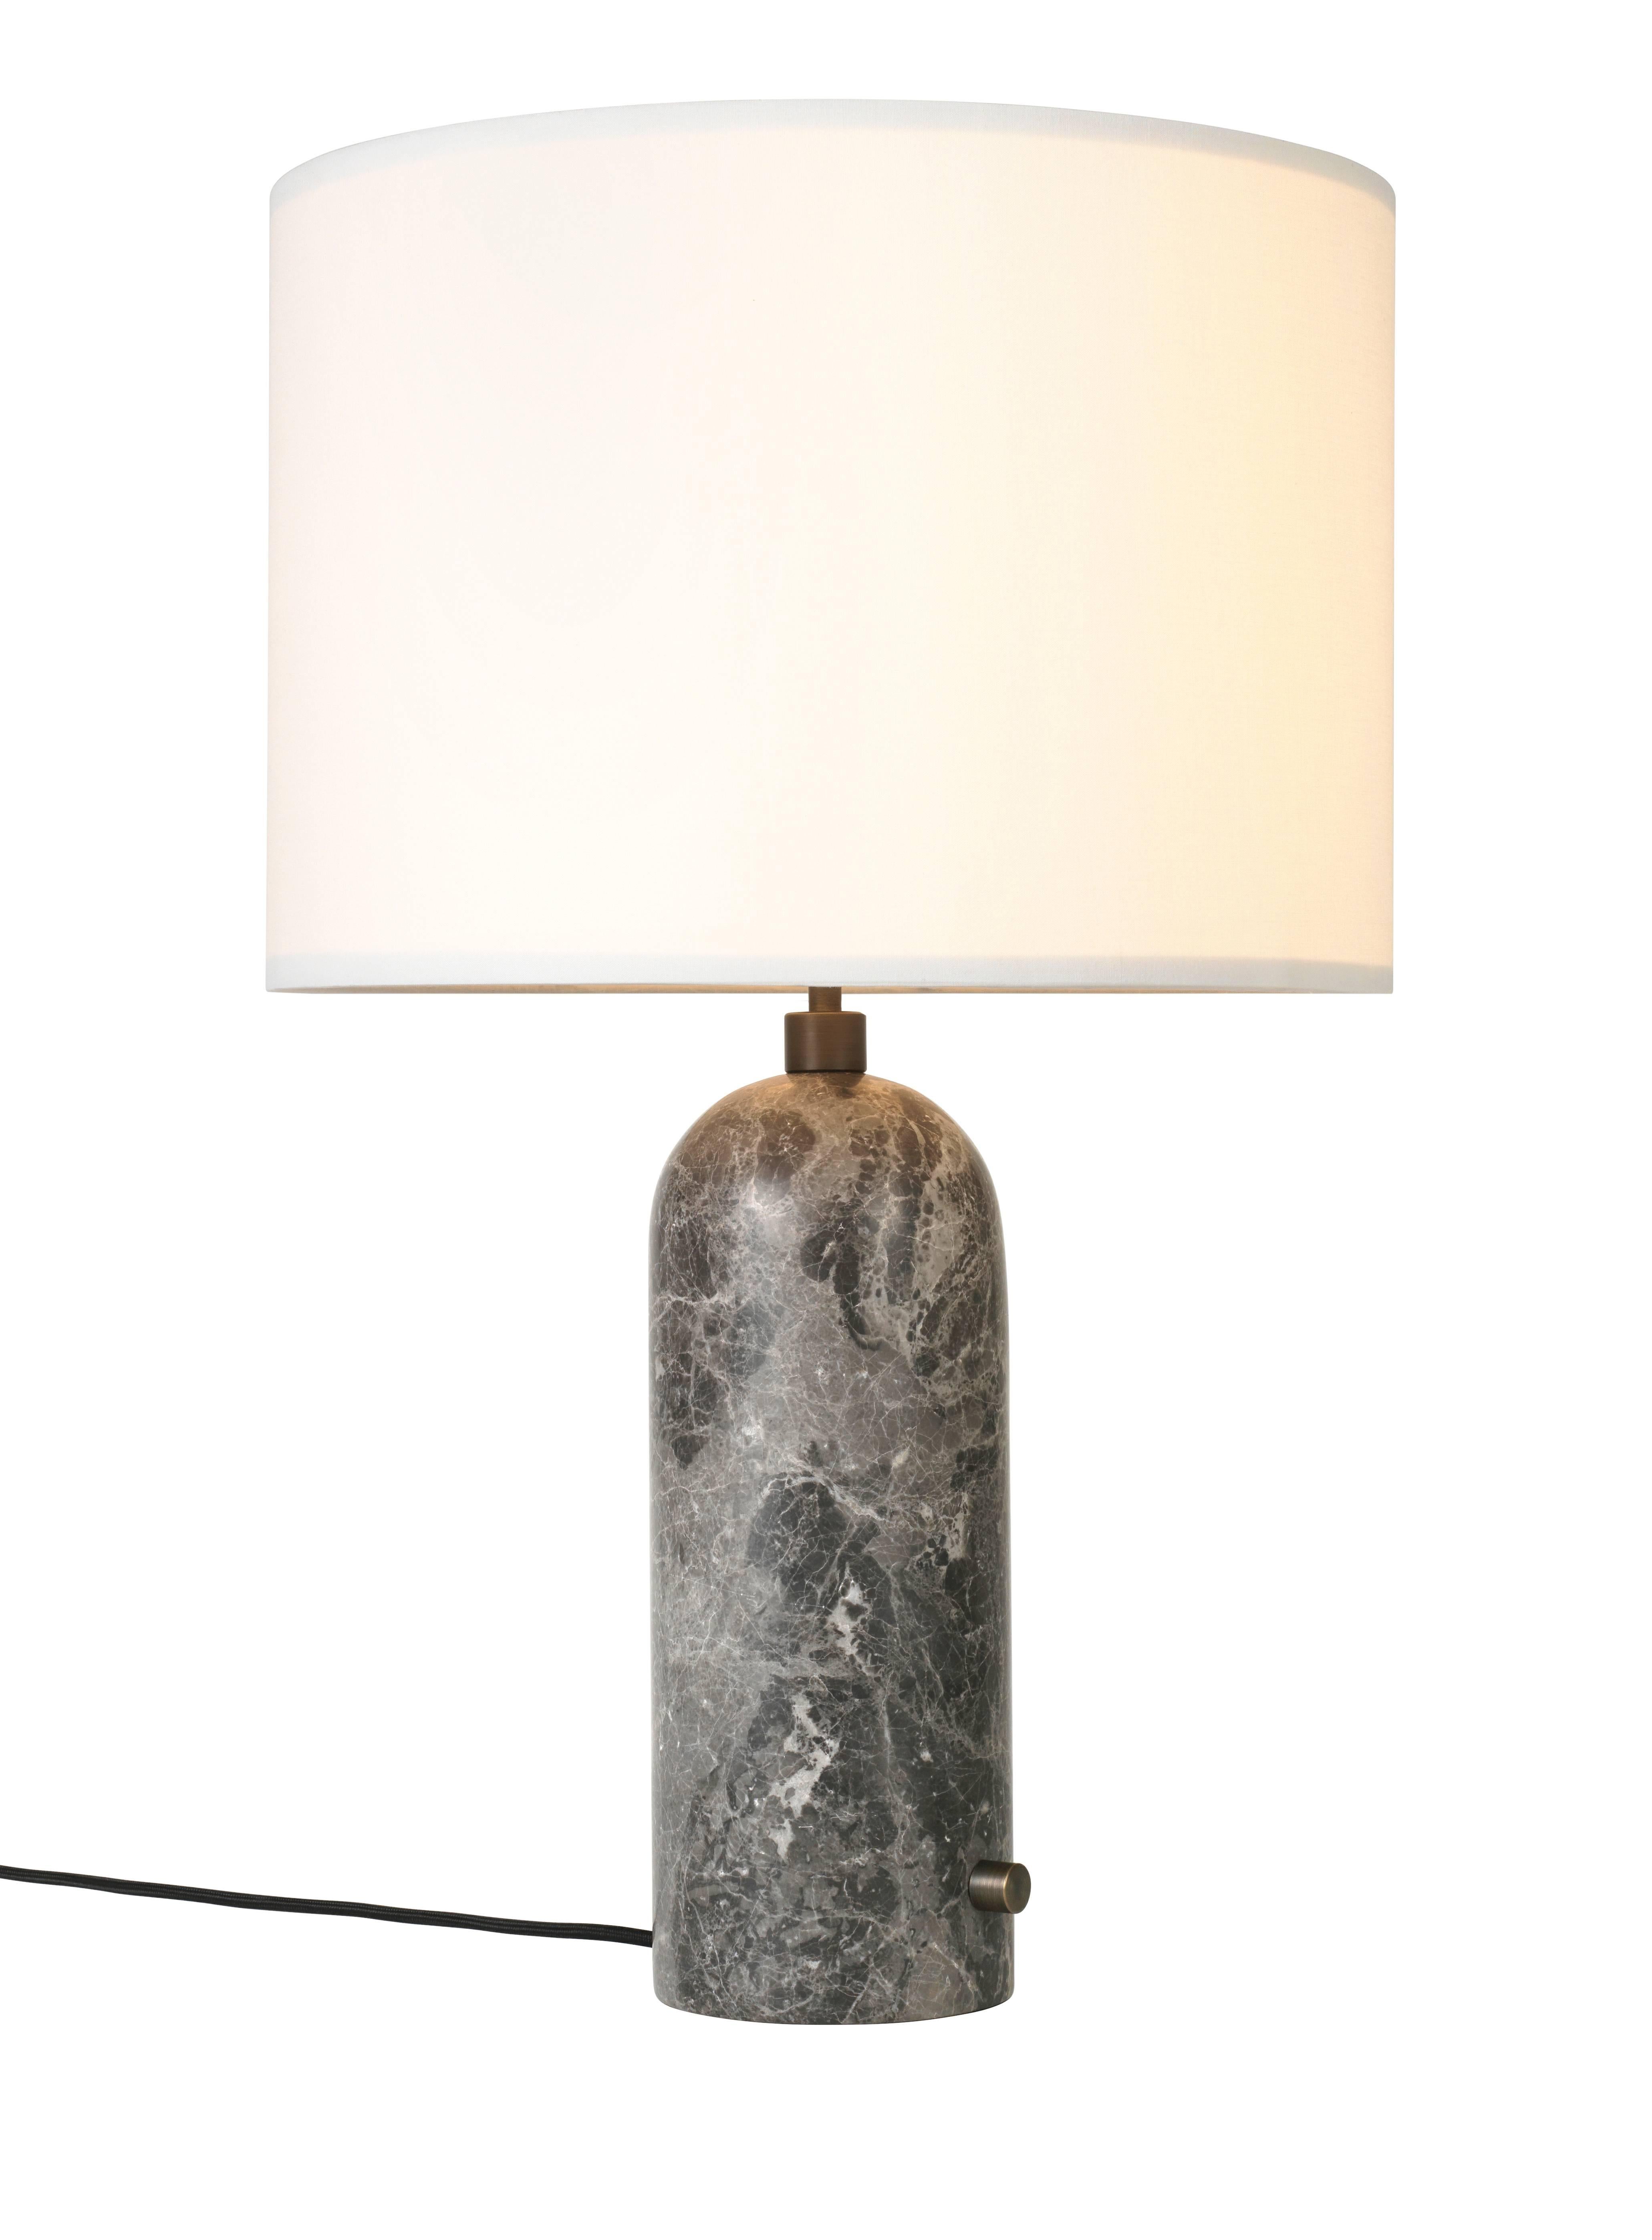 Gravity, grey marble table lamp
Dimensions: 65 x 41 x 41 cm
Material: Marble
Designer: Louis Weisdorf
Produced by Gubi in Denmark

The new Gravity collection designed by Space
Copenhagen, consisting of a table lamp and a floor
lamp, is